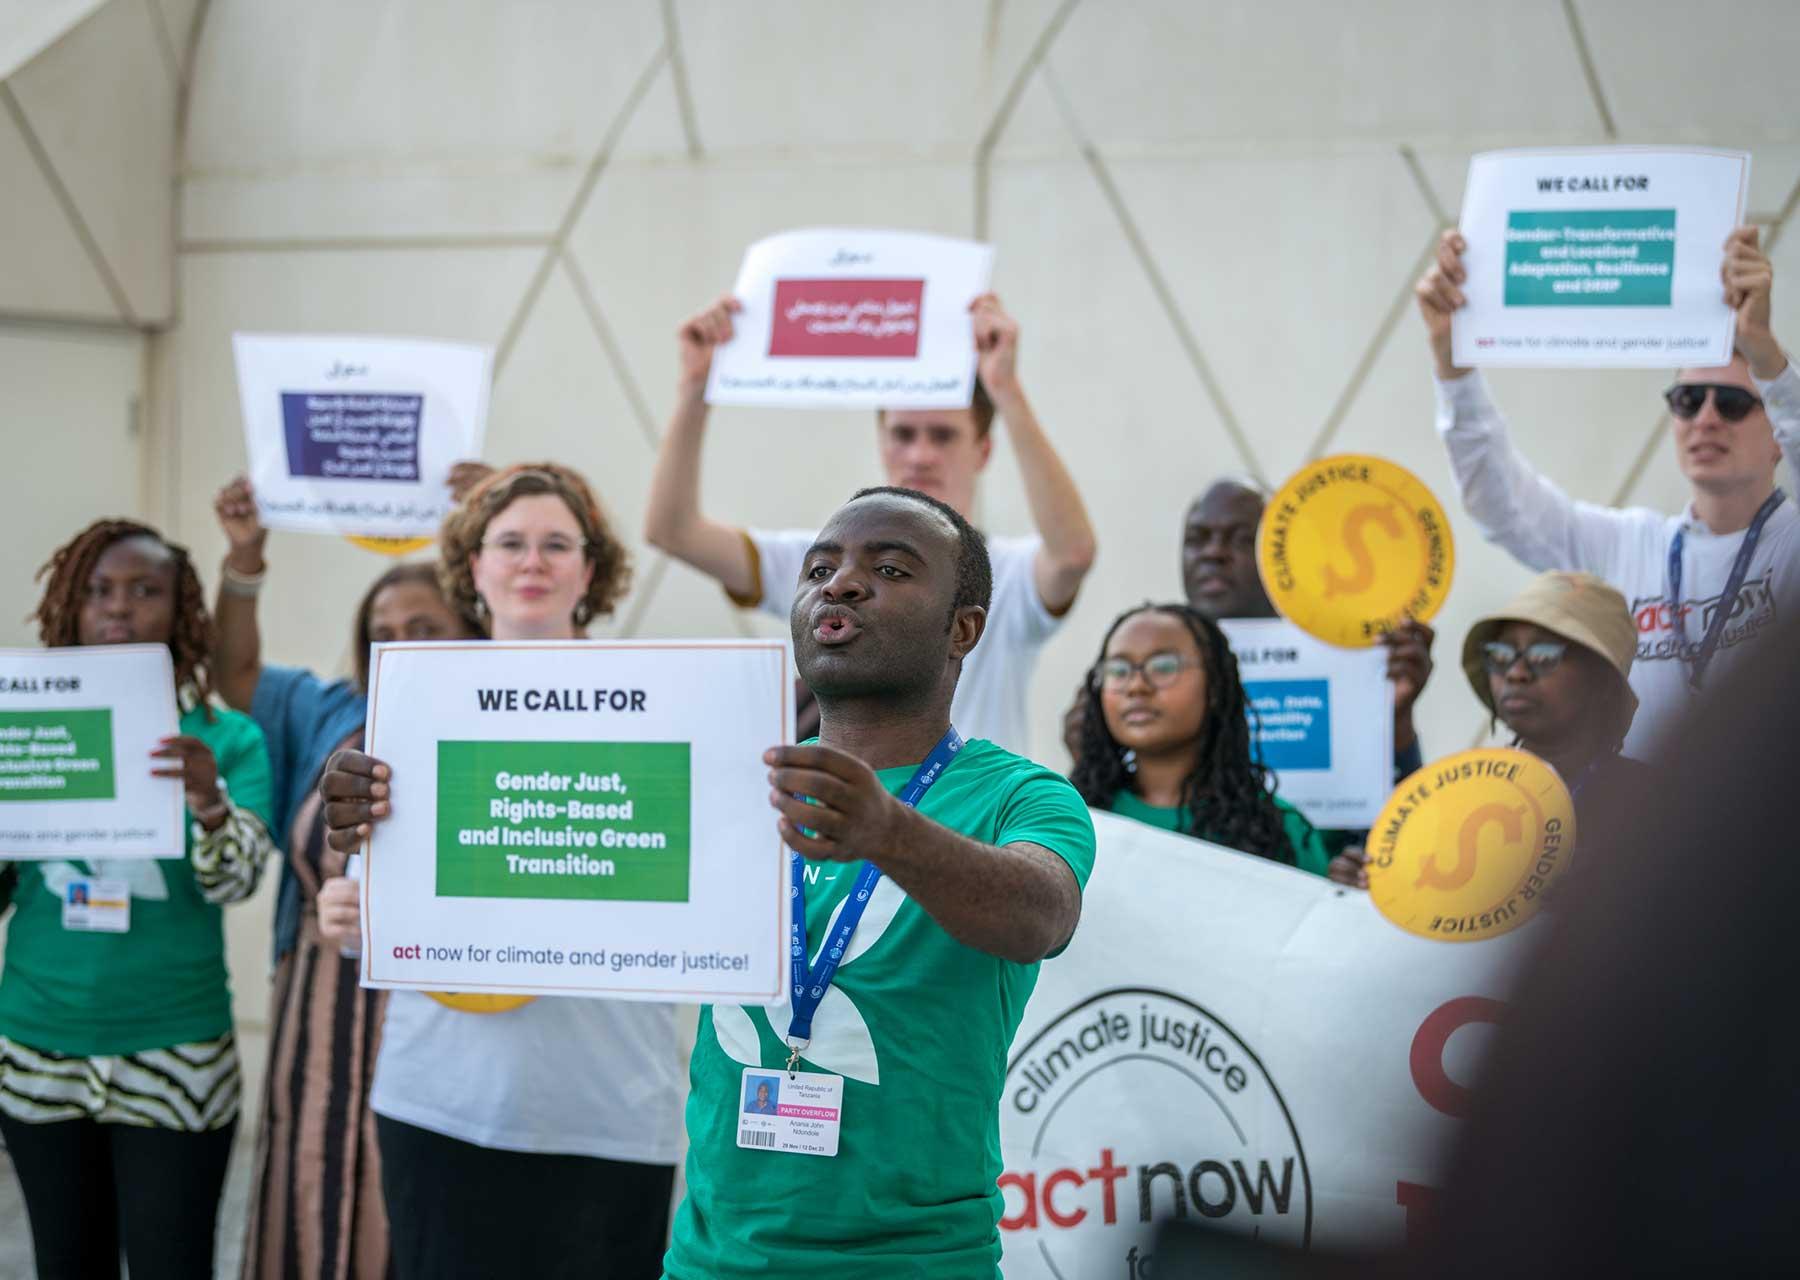 Anania John Ndondole of the Evangelical Lutheran Church in Tanzania participates in an advocacy action for gender justice together with Christians from various, at the United Nations climate summit COP28. Photo: LWF/A. Hillert